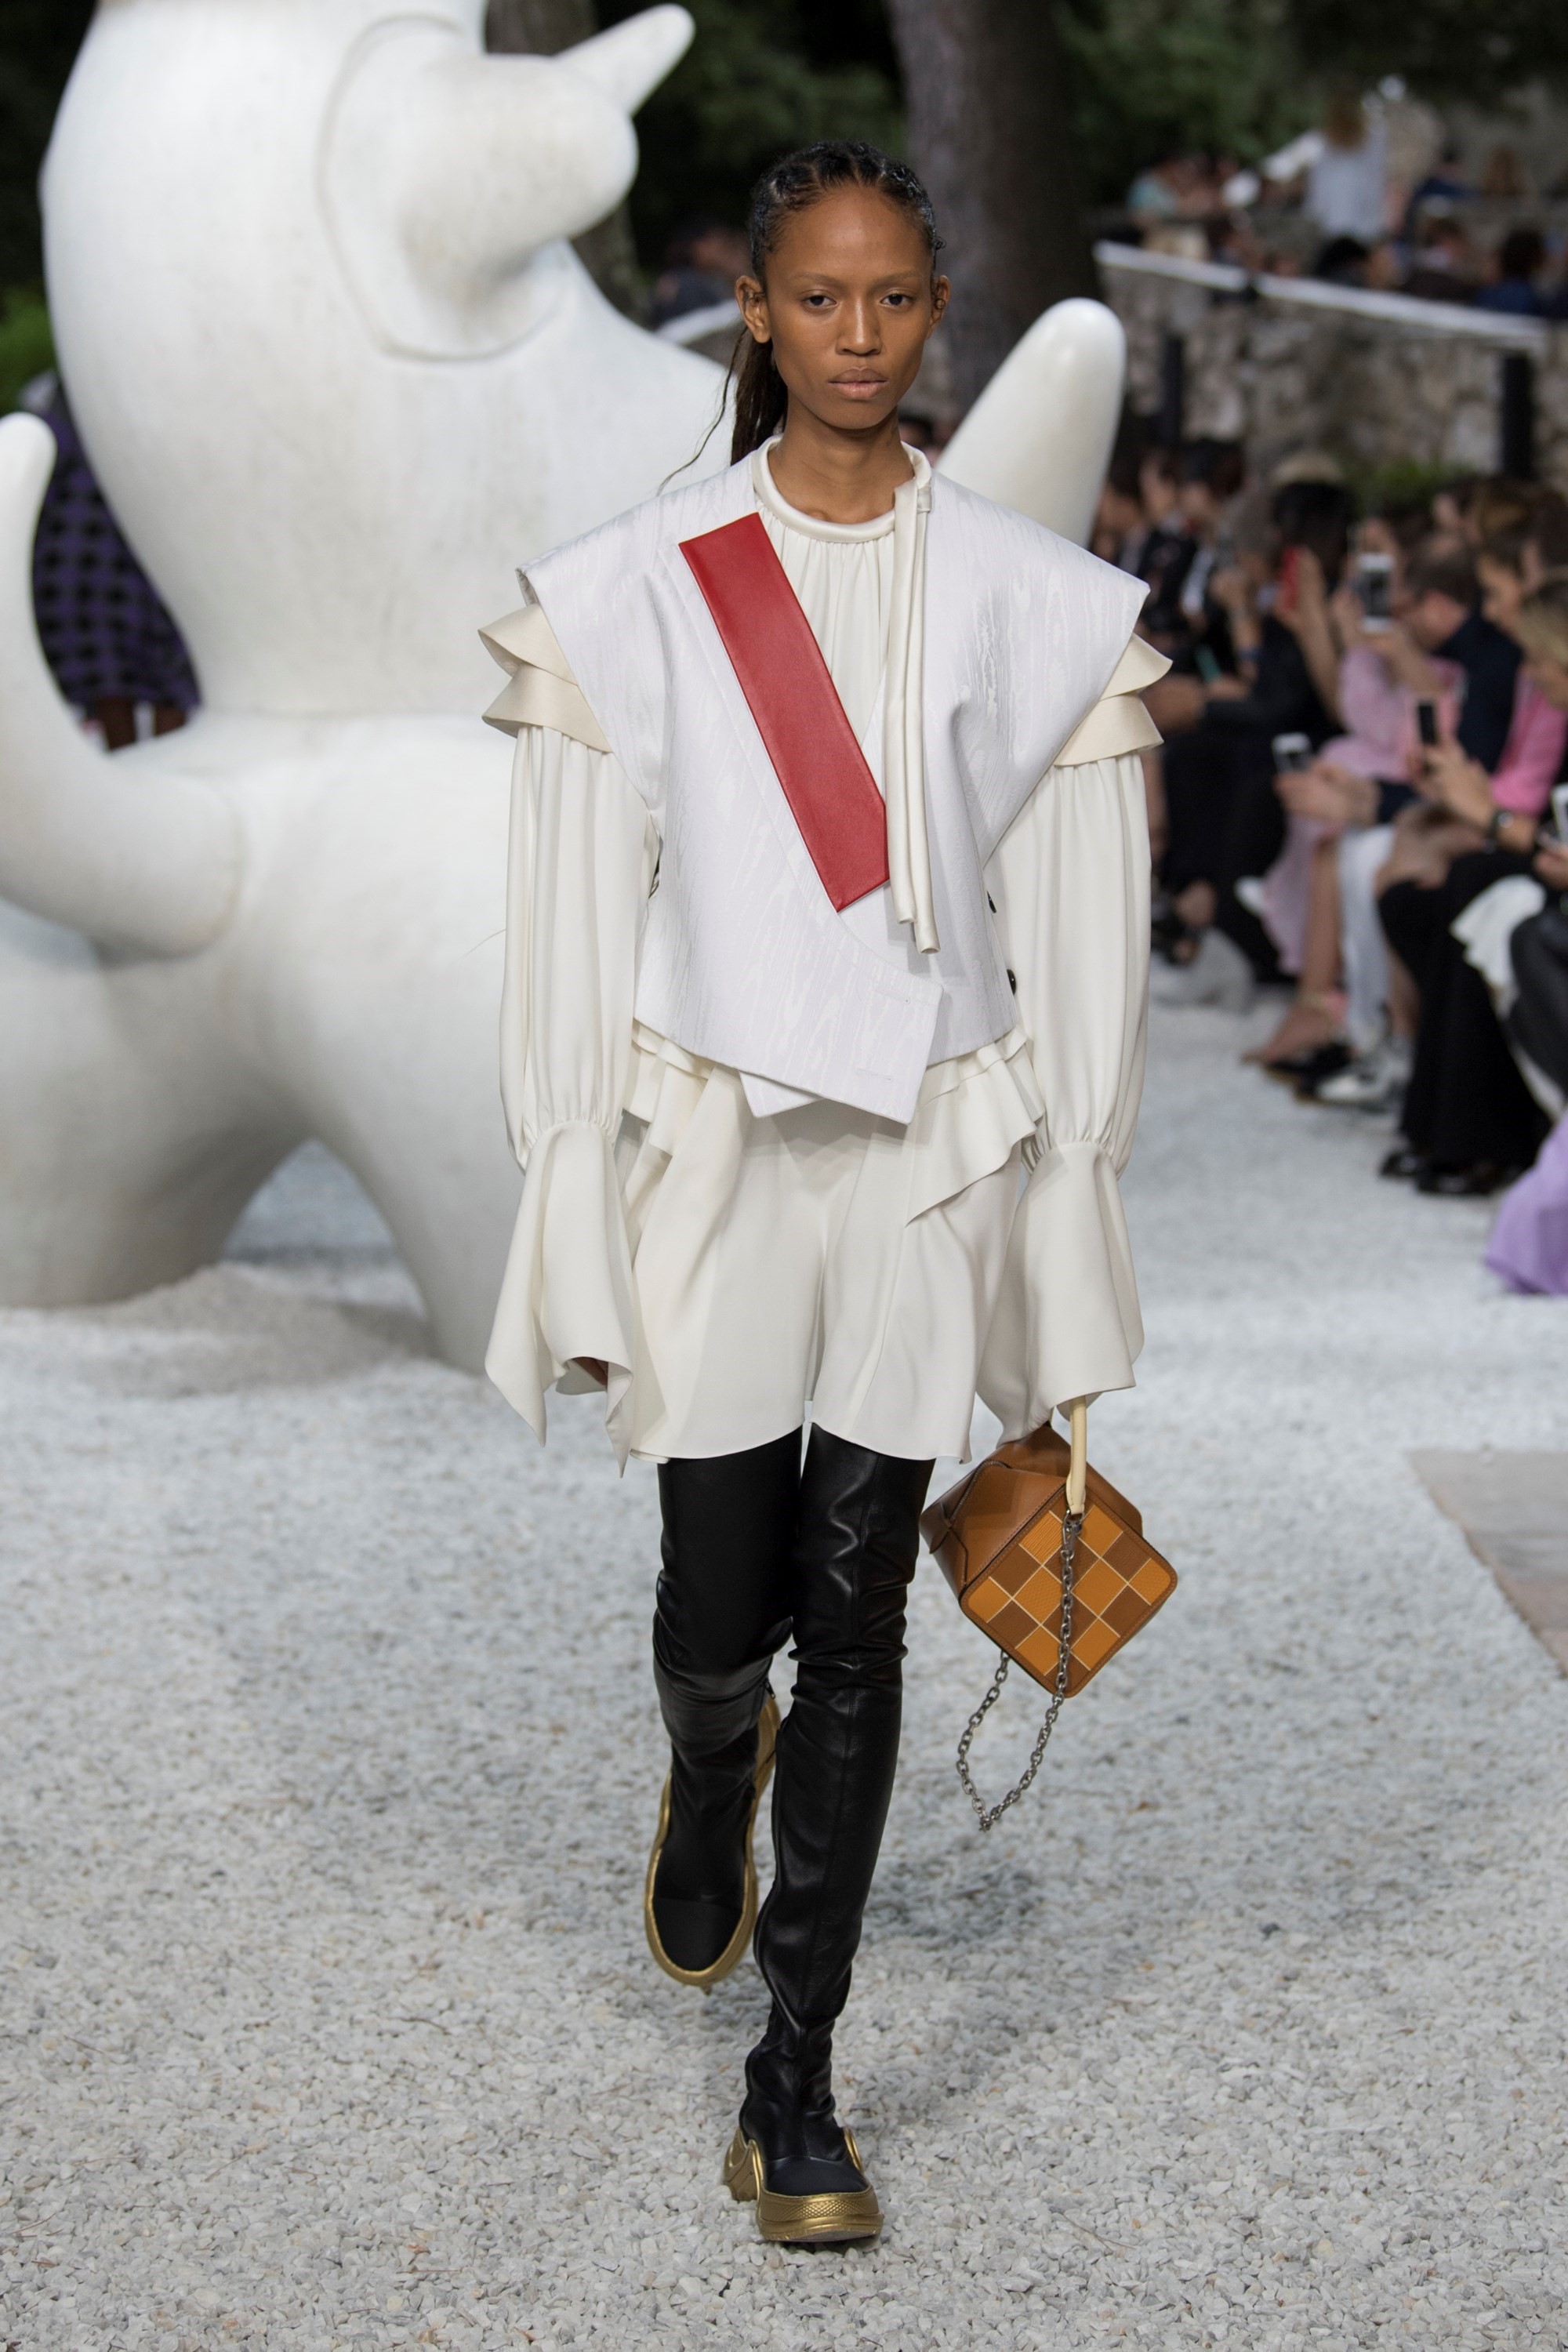 Louis Vuitton Cruise 2019 Runway Bag Collection - Spotted Fashion